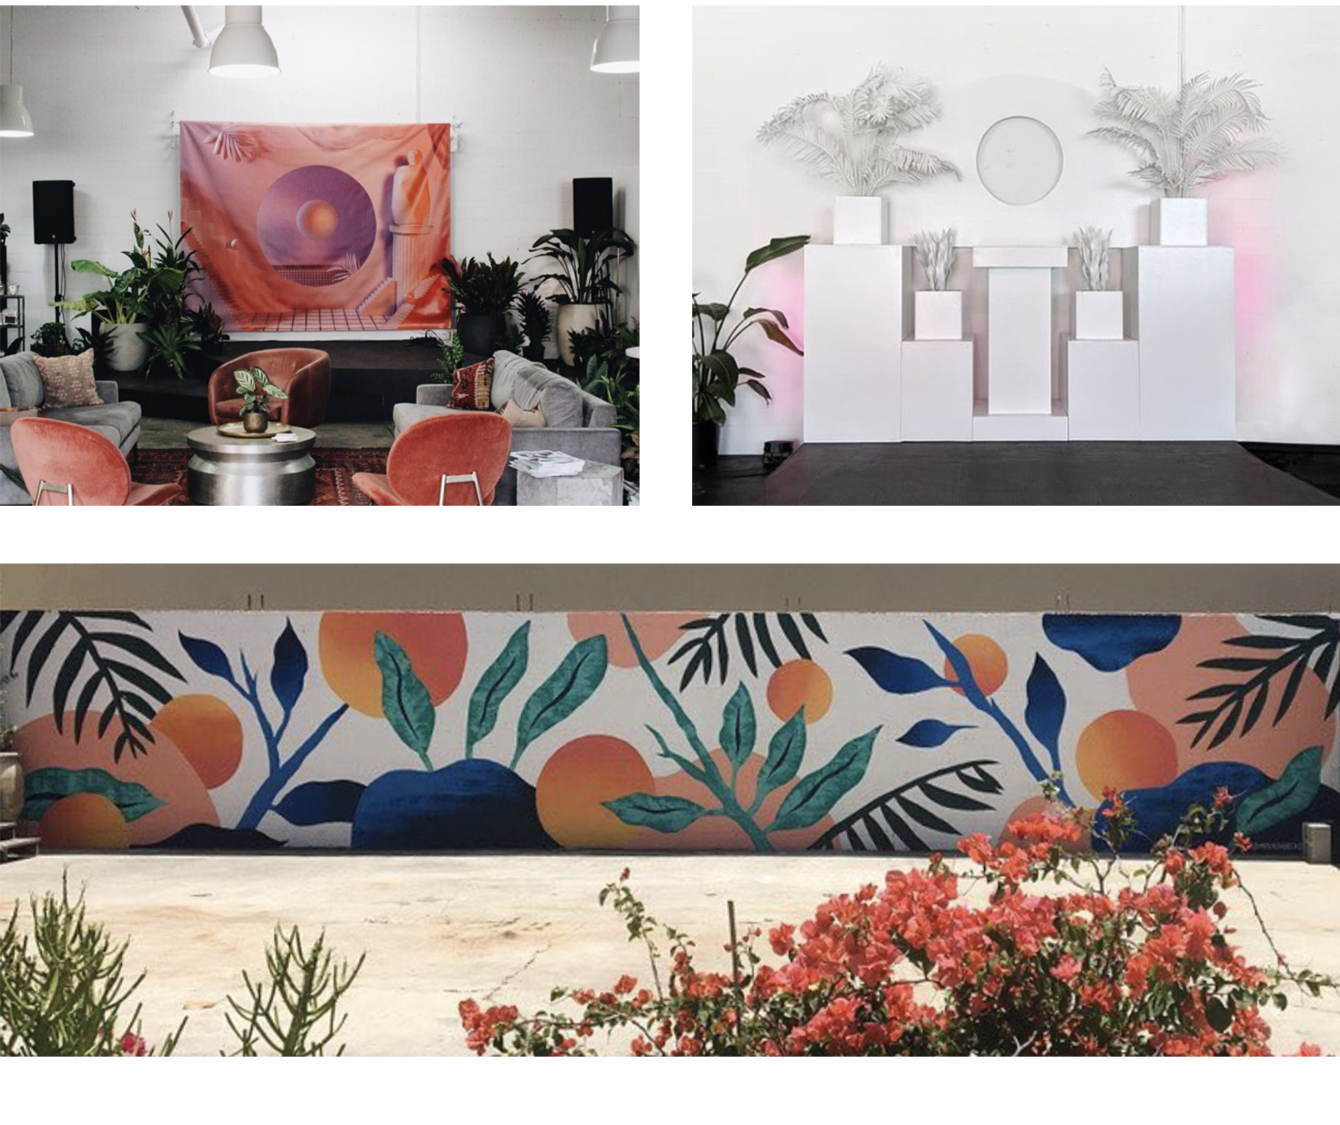 Stage backdrop and installation created in collaboration with Melissa Deckert, as well as a colorful and abstract botanical mural design in the courtyard of Elizabeth Ave Station.